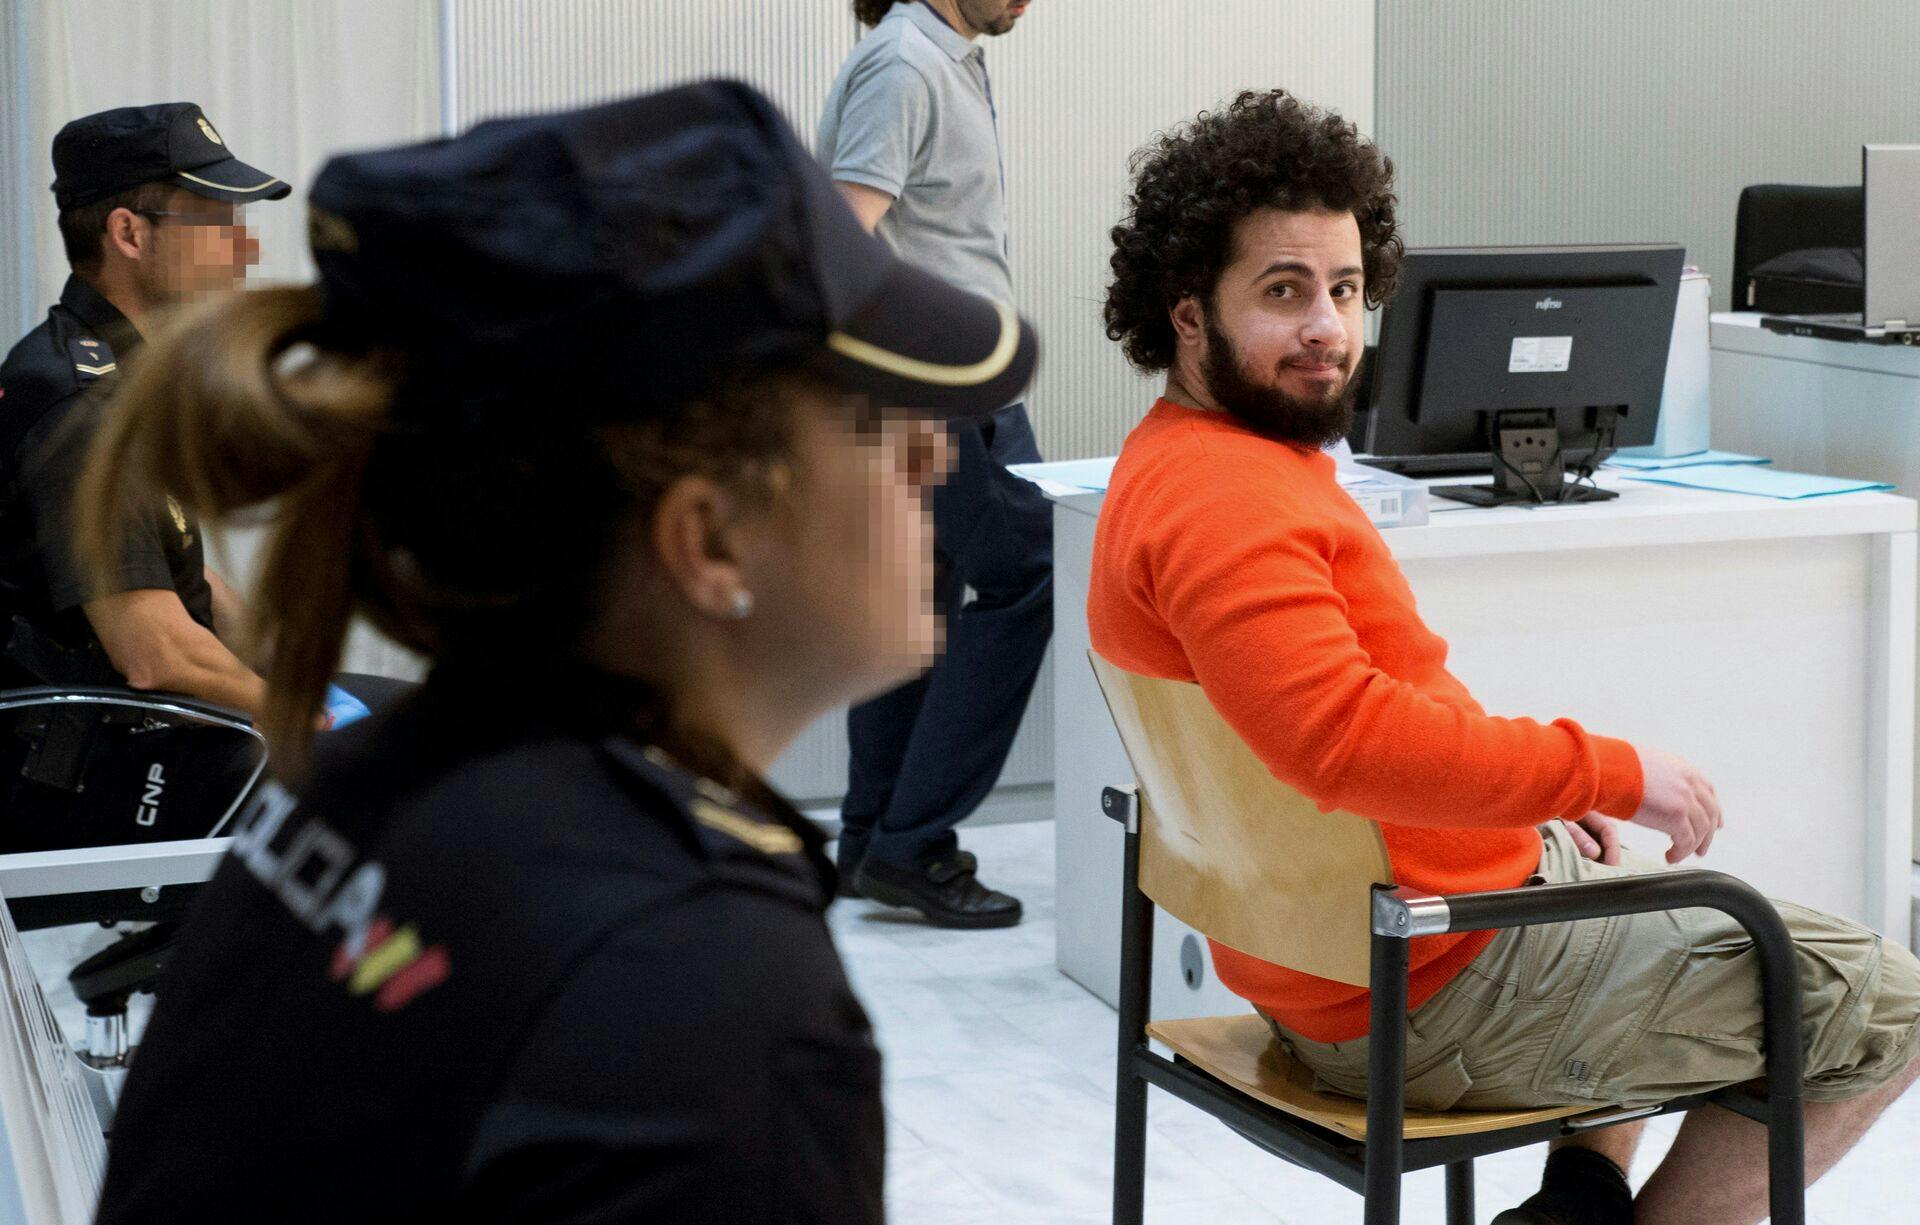 Danish Ahmed Samsam poses at a court in Madrid on June 12, 2018 during his trial on charges of having fought in the ranks of the Islamic State for more than three years. Luca Piergiovanni / POOL / AFP